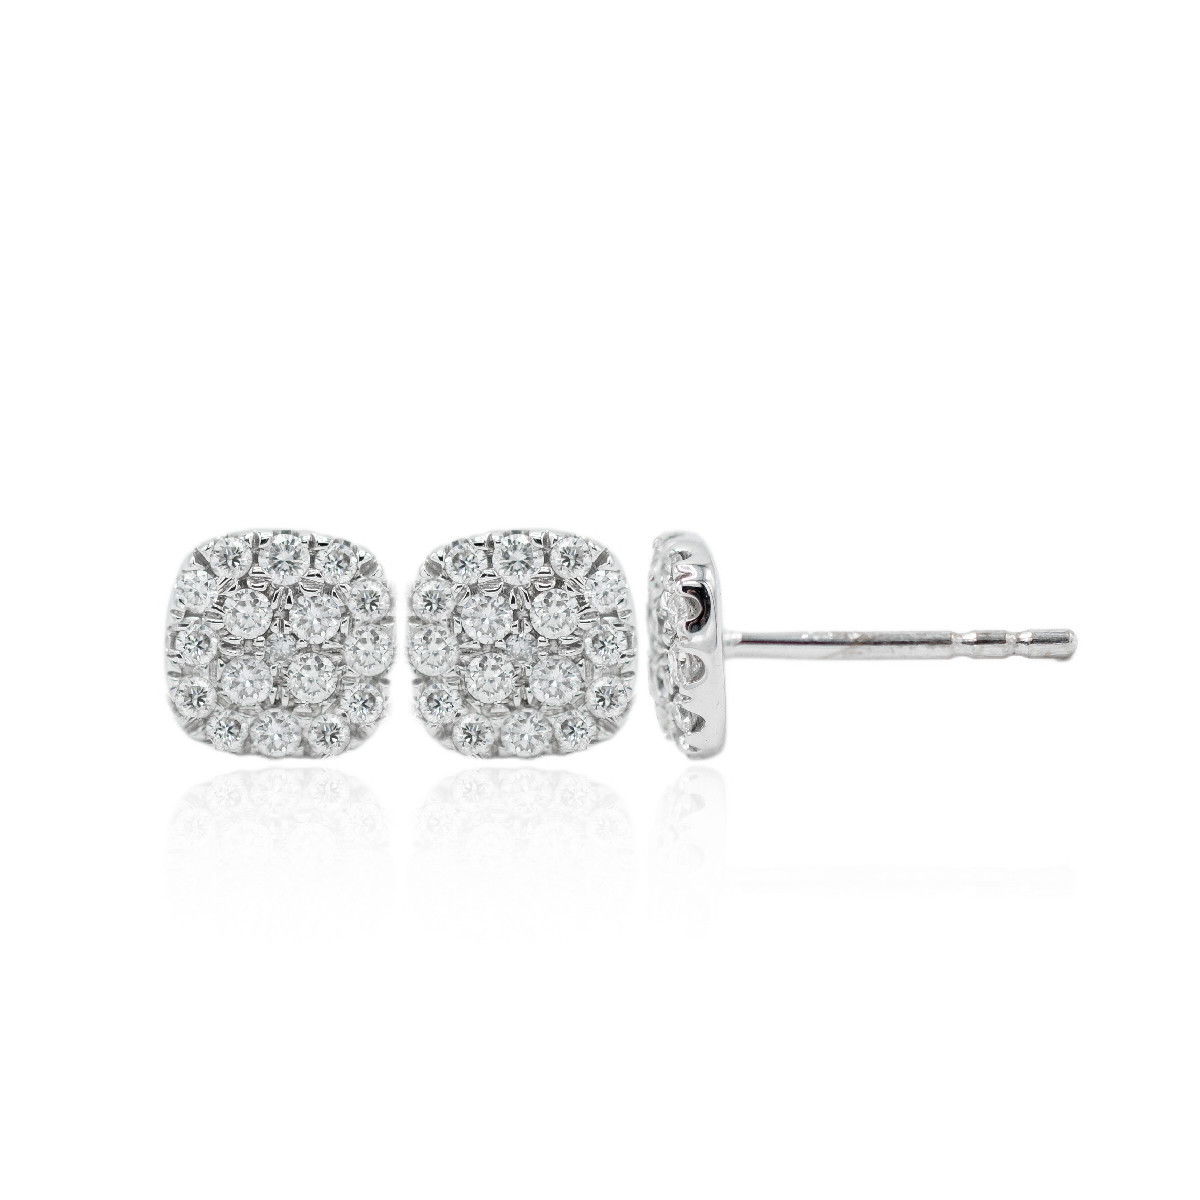 Gold and diamonds earrings